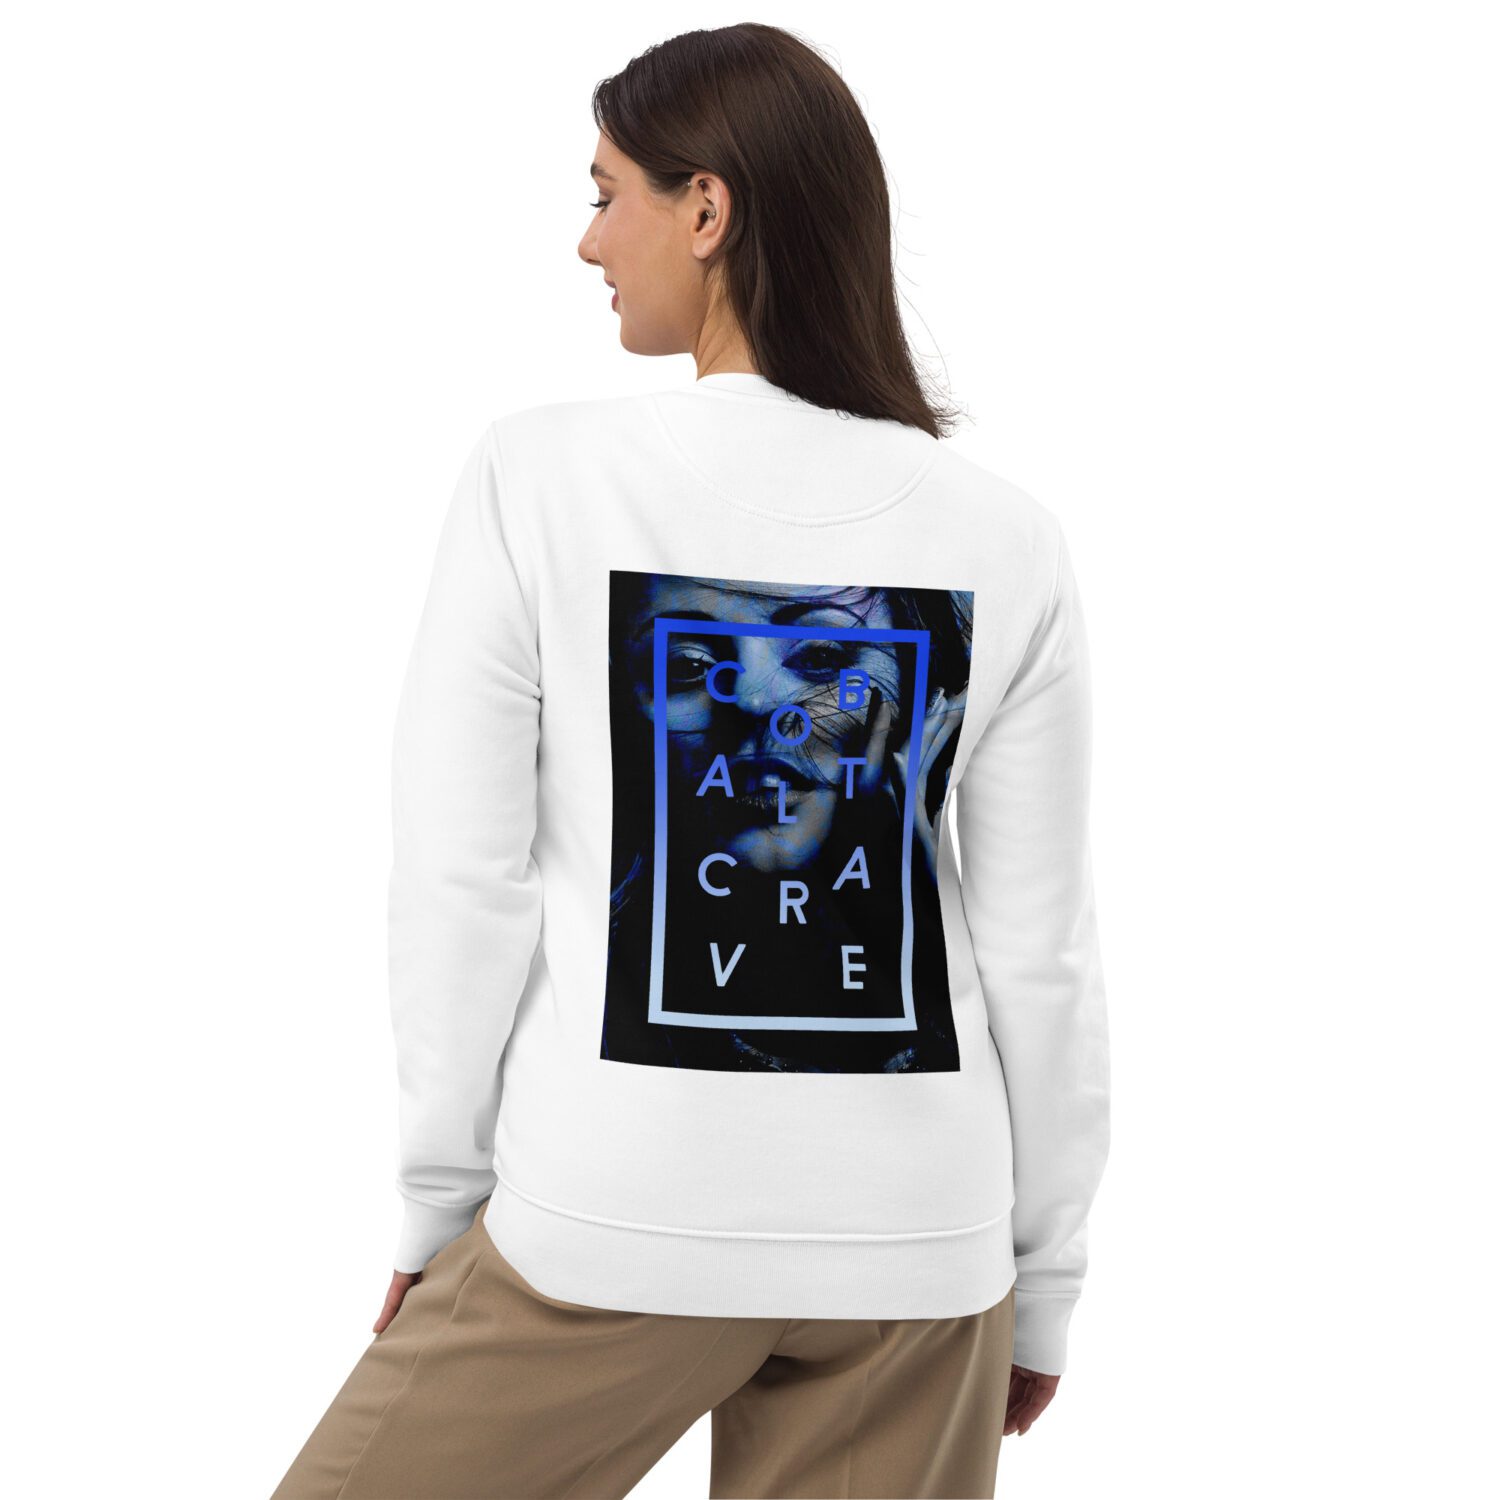 A classic slim fit white unisex sweatshirt with royal blue print on the back. Made with organic ring-spun combed cotton for a soft feel. Super soft fleece inside making it perfect for keeping warm. Cool cobalt blue print on upper back and logo in the front.